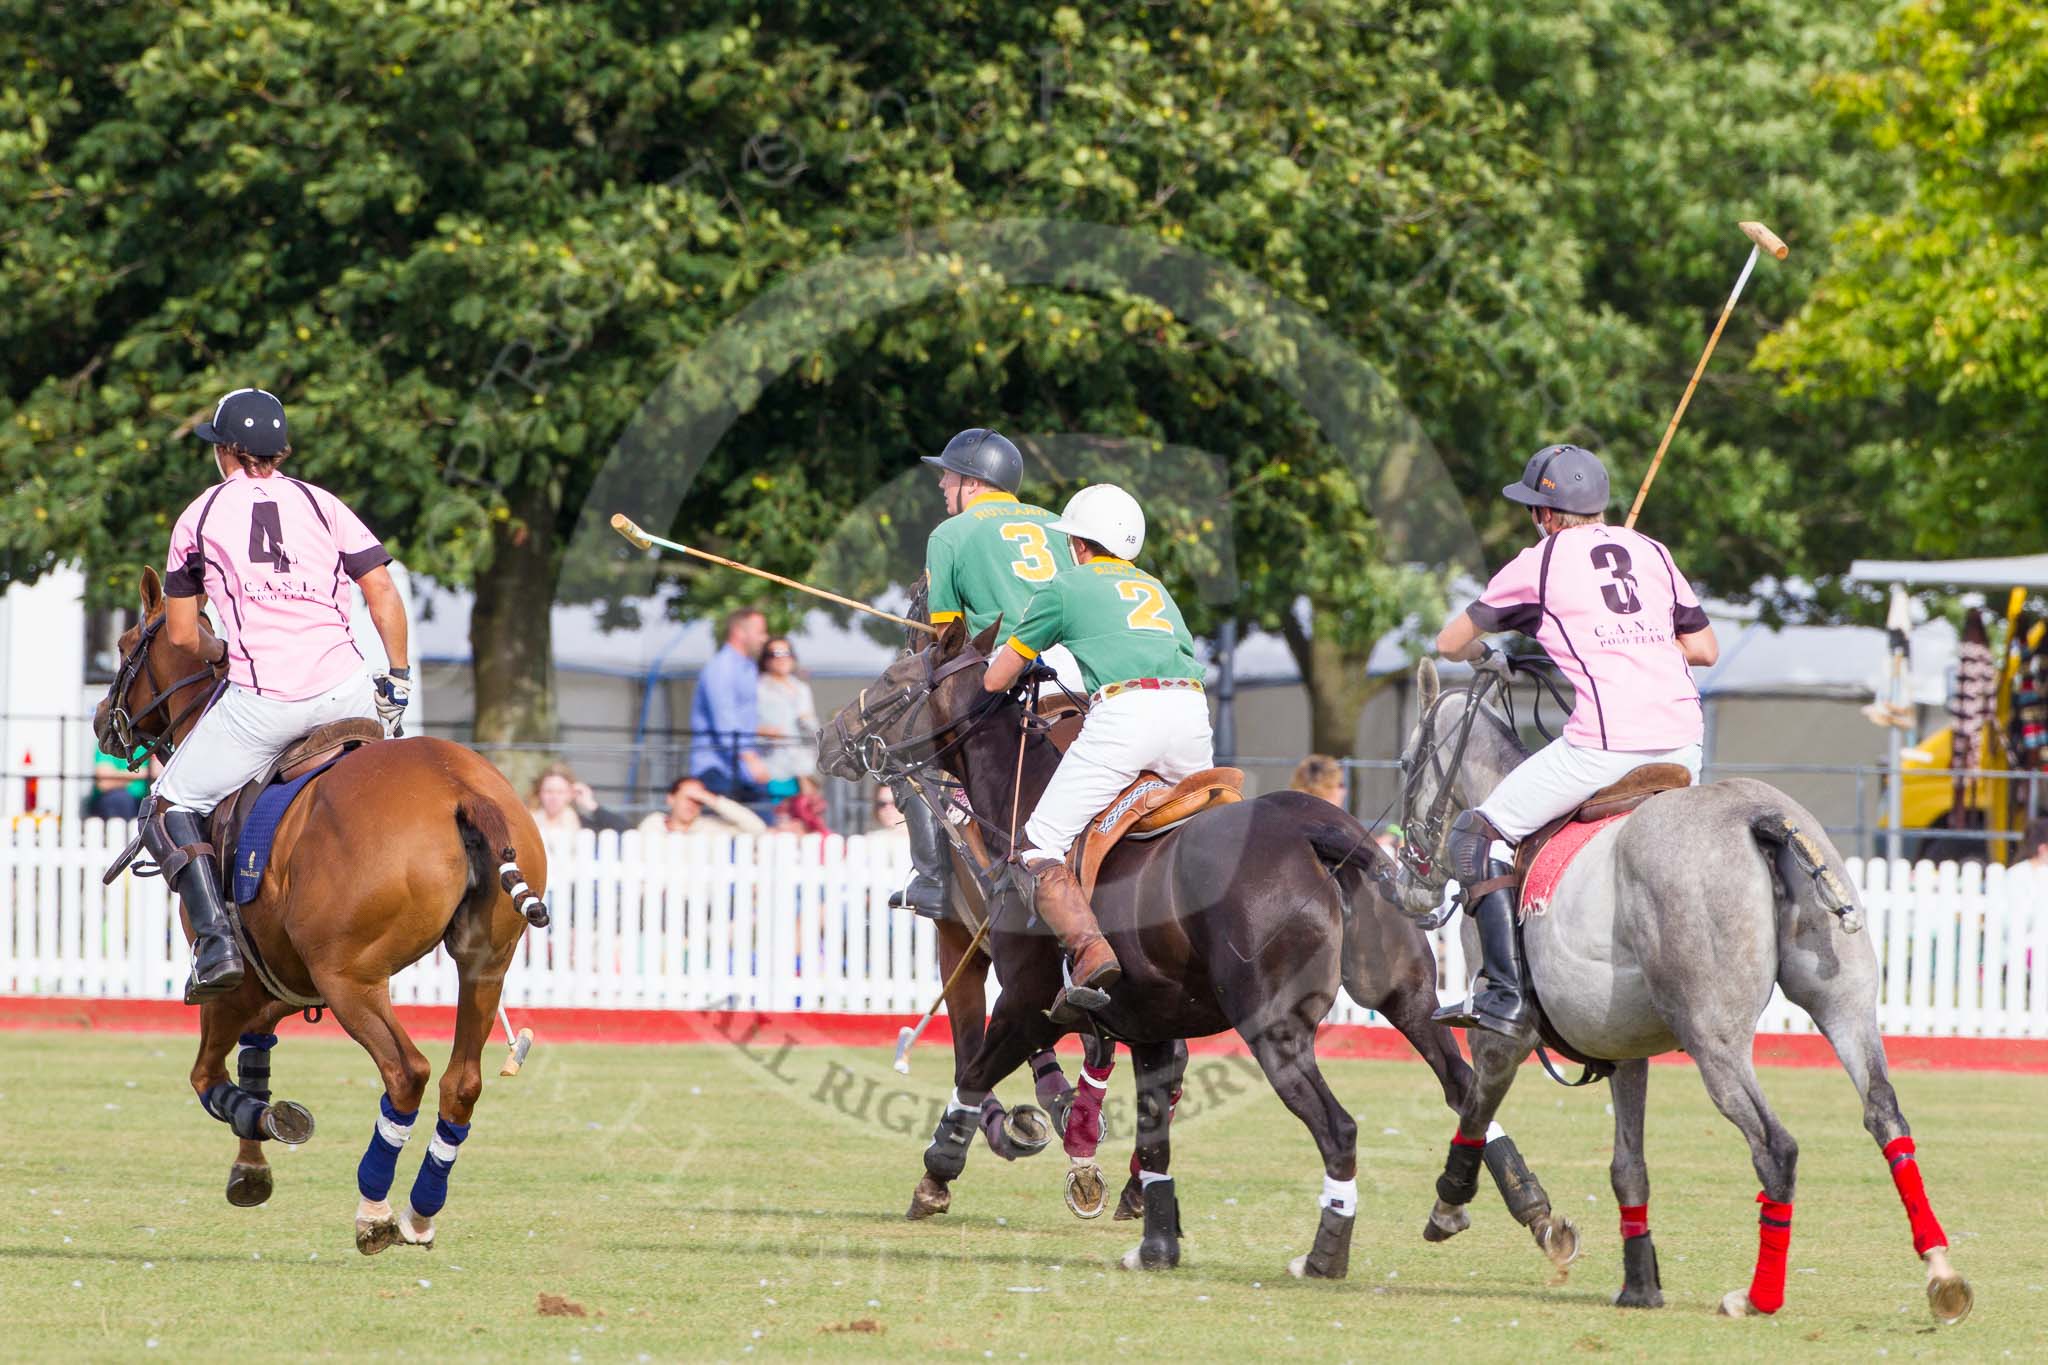 DBPC Polo in the Park 2013, Final of the Tusk Trophy (4 Goals), Rutland vs C.A.N.I..
Dallas Burston Polo Club, ,
Southam,
Warwickshire,
United Kingdom,
on 01 September 2013 at 16:36, image #590